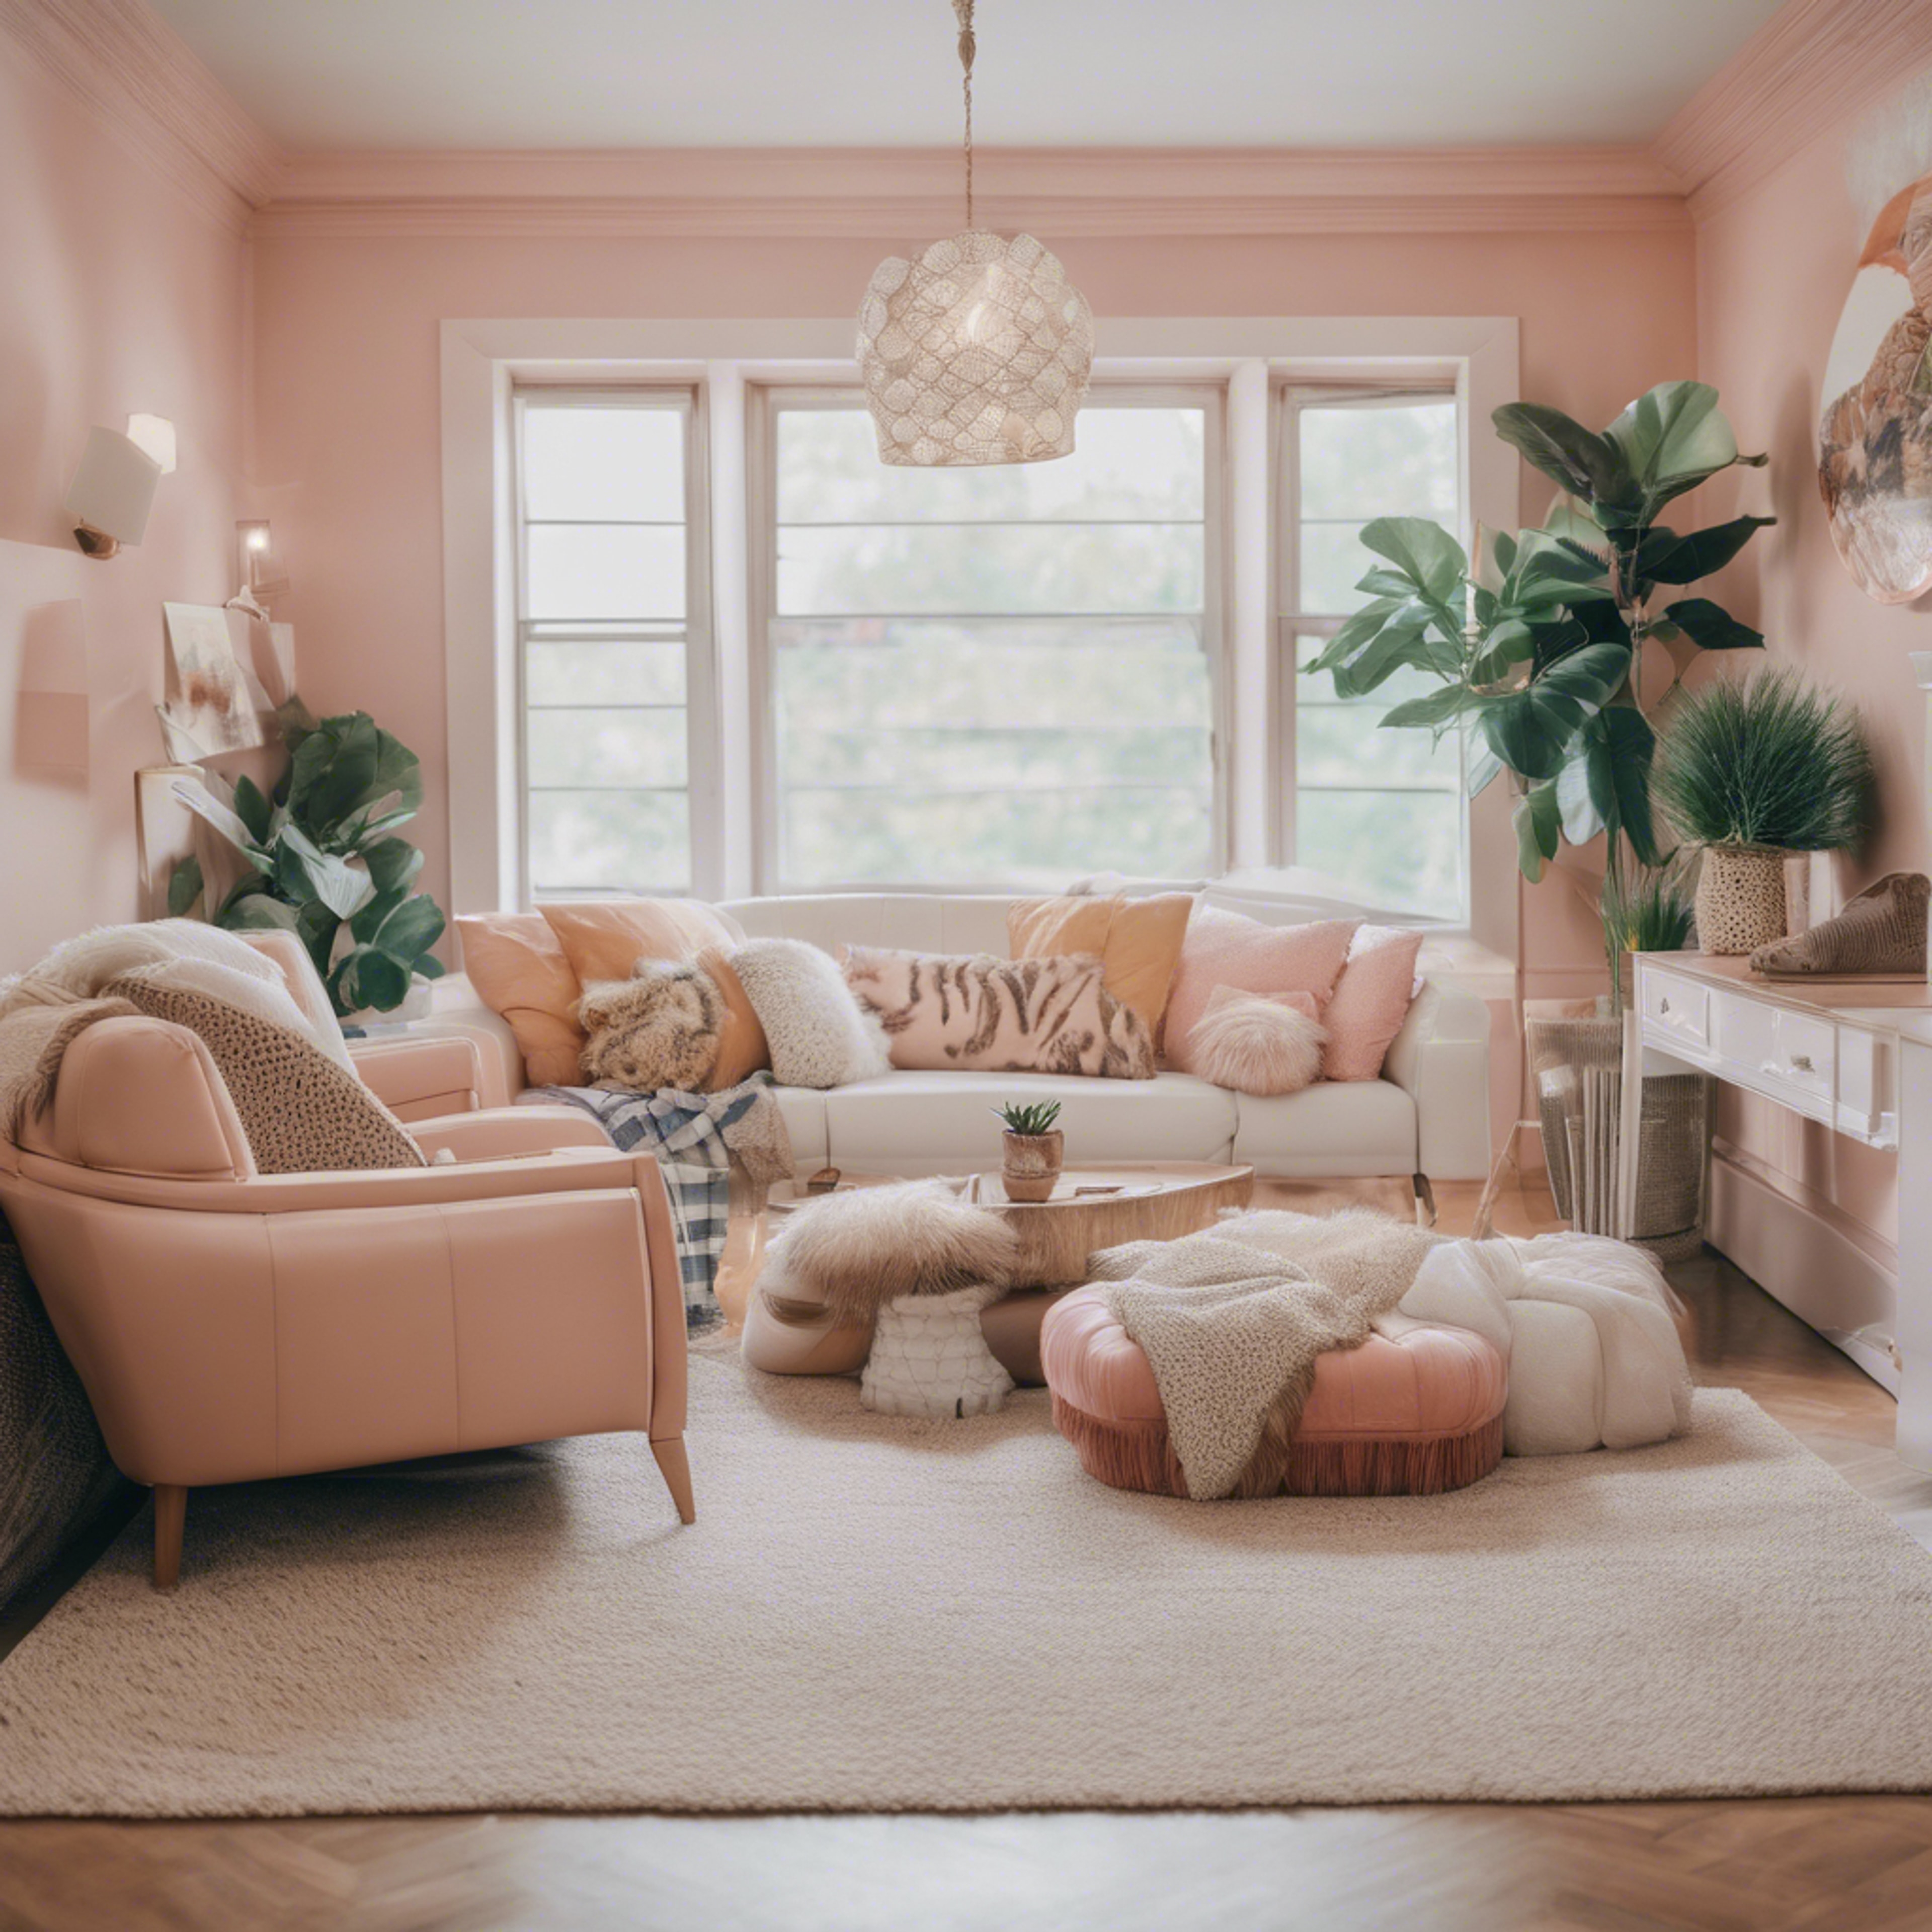 A tastefully decorated preppy aesthetic interior with animal prints, plaids, and pastel colors. Tapet[013da7e2e0464972ad87]